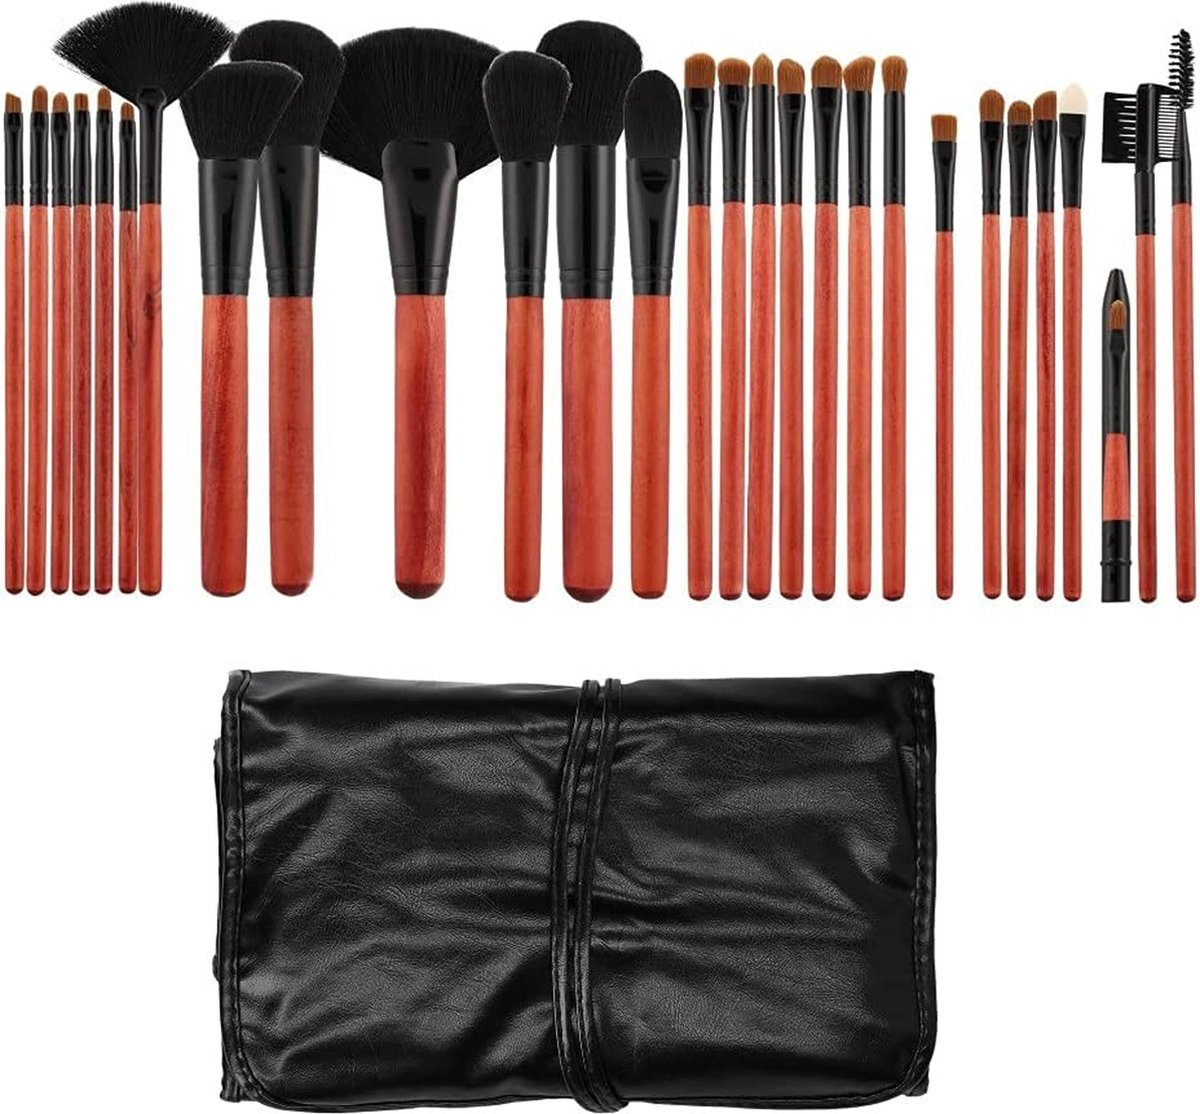 Tools For Beauty Make-Up Brush Set 28 Pieces - Black